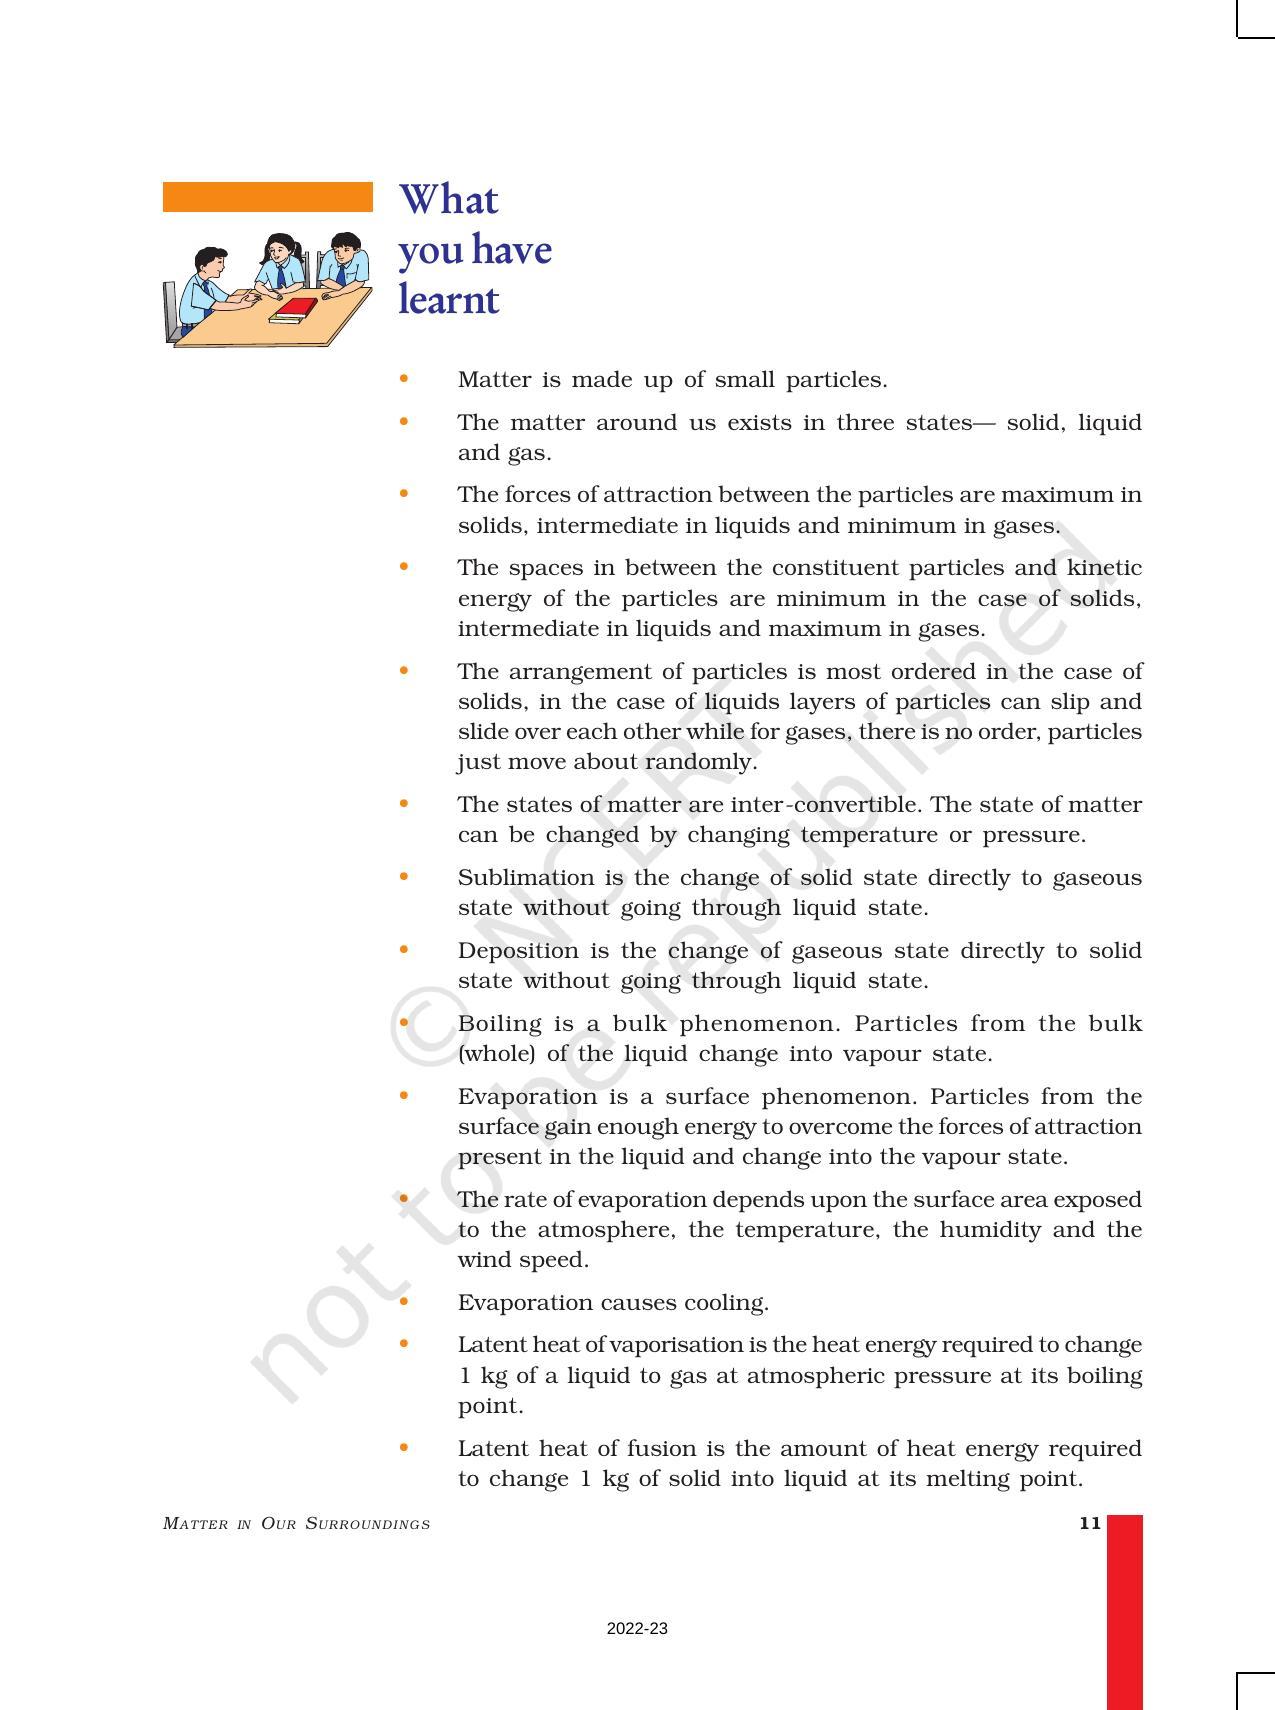 NCERT Book for Class 9 Science Chapter 1 Matter in Our Surroundings - Page 11